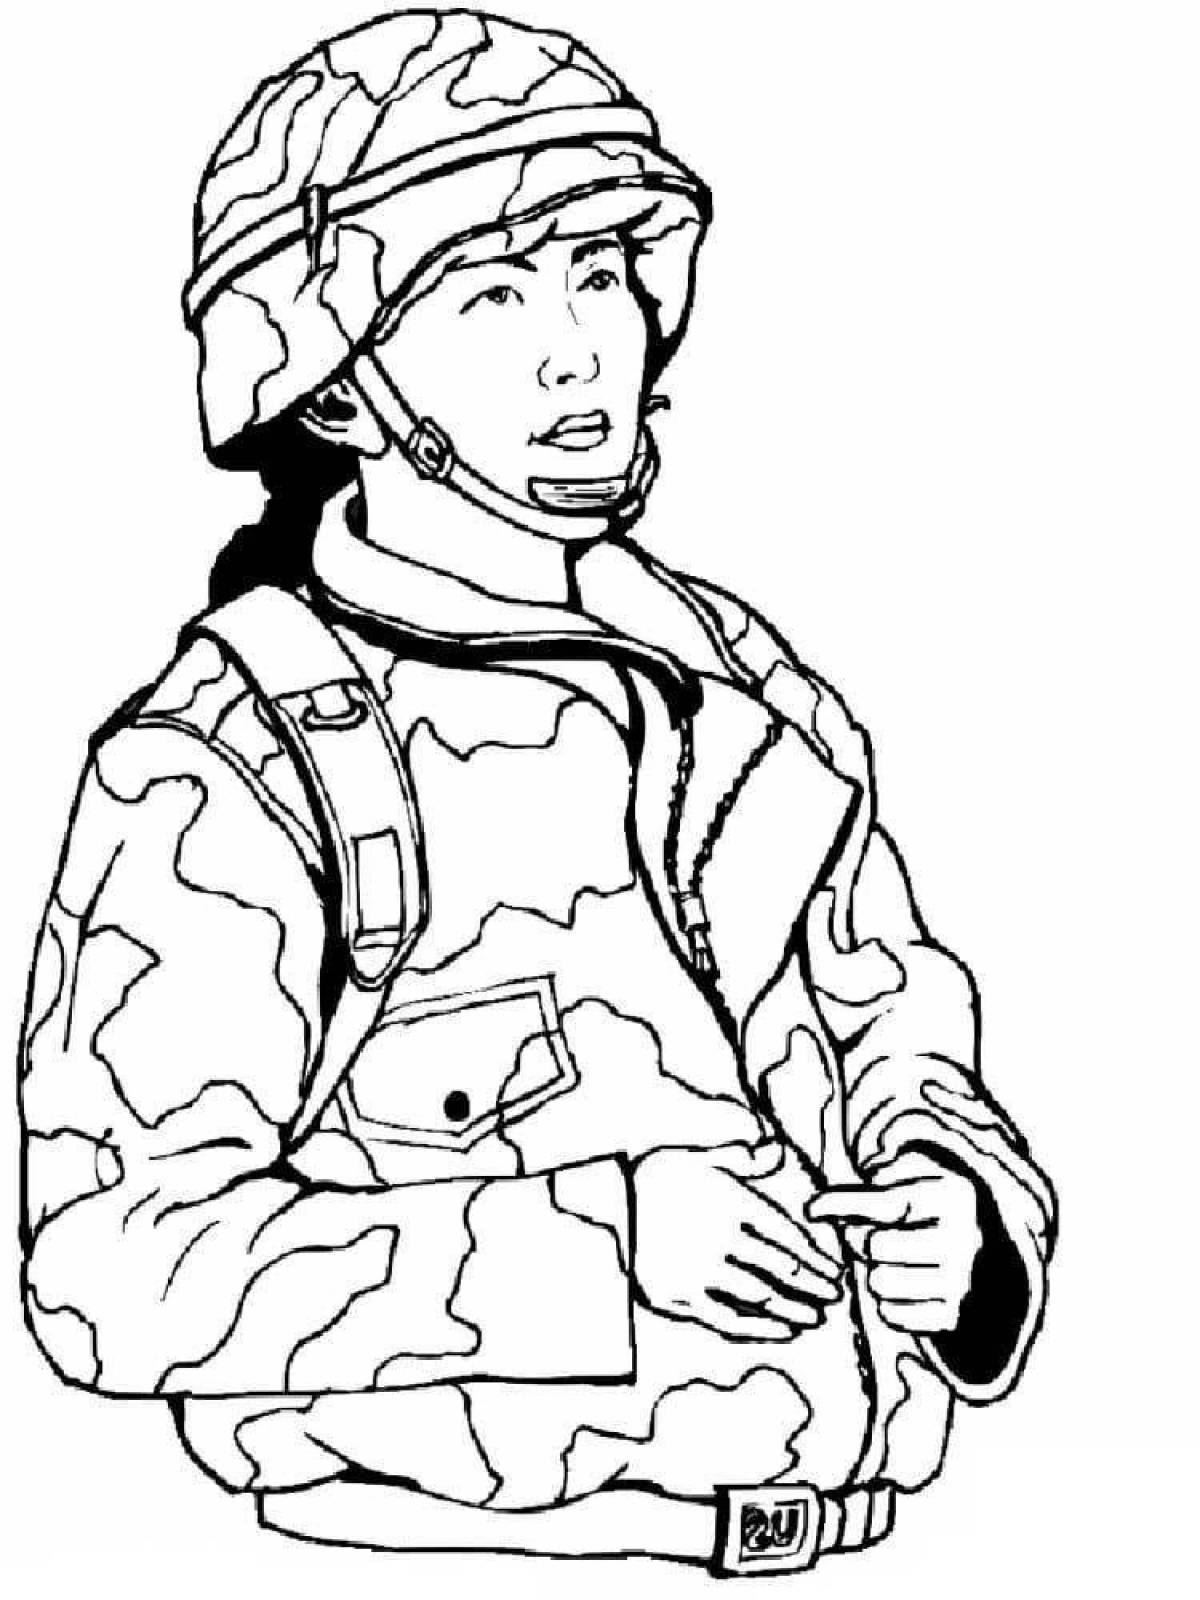 Shiny army coloring page